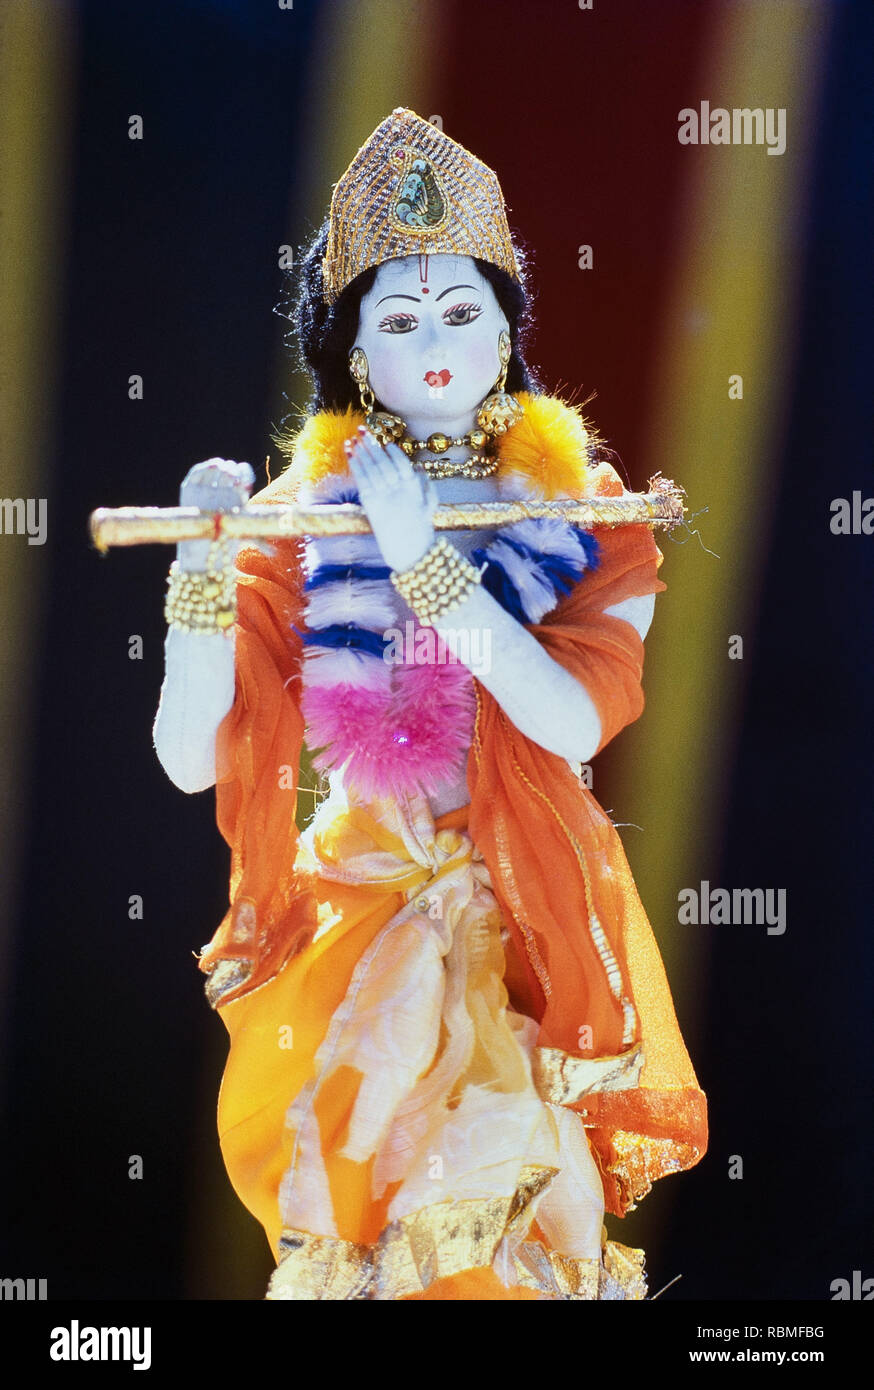 Hand made doll of Lord Krishna, India, Asia Stock Photo